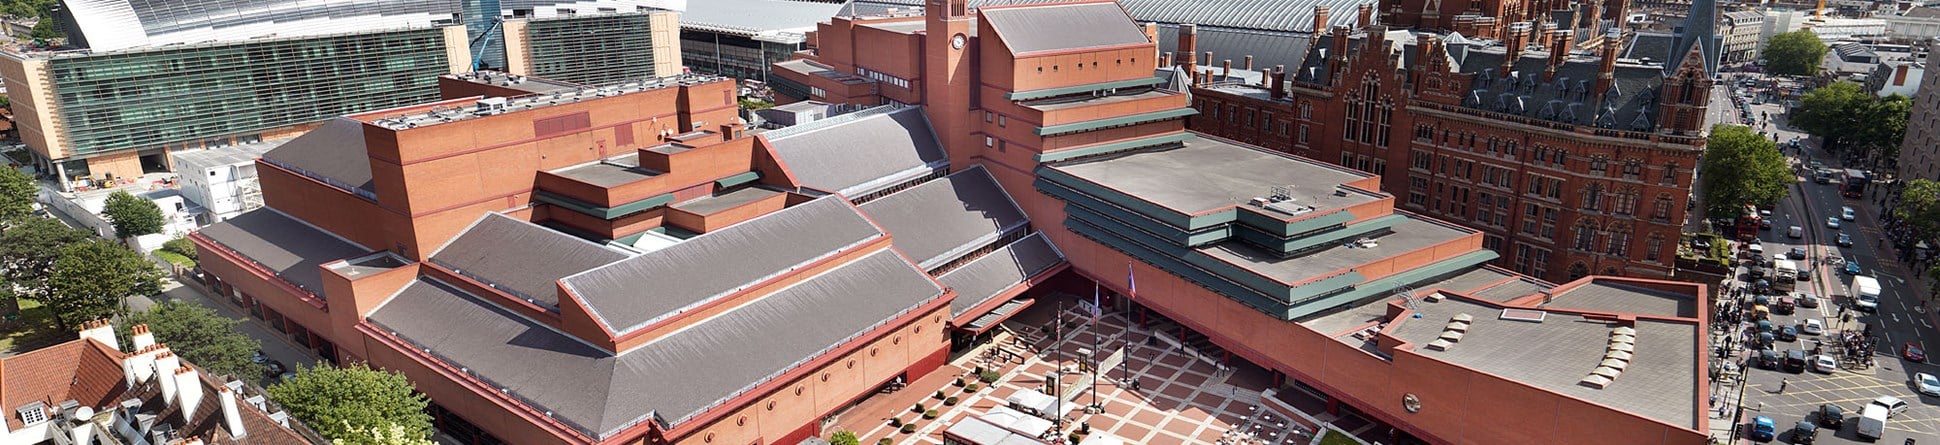 British Library external view